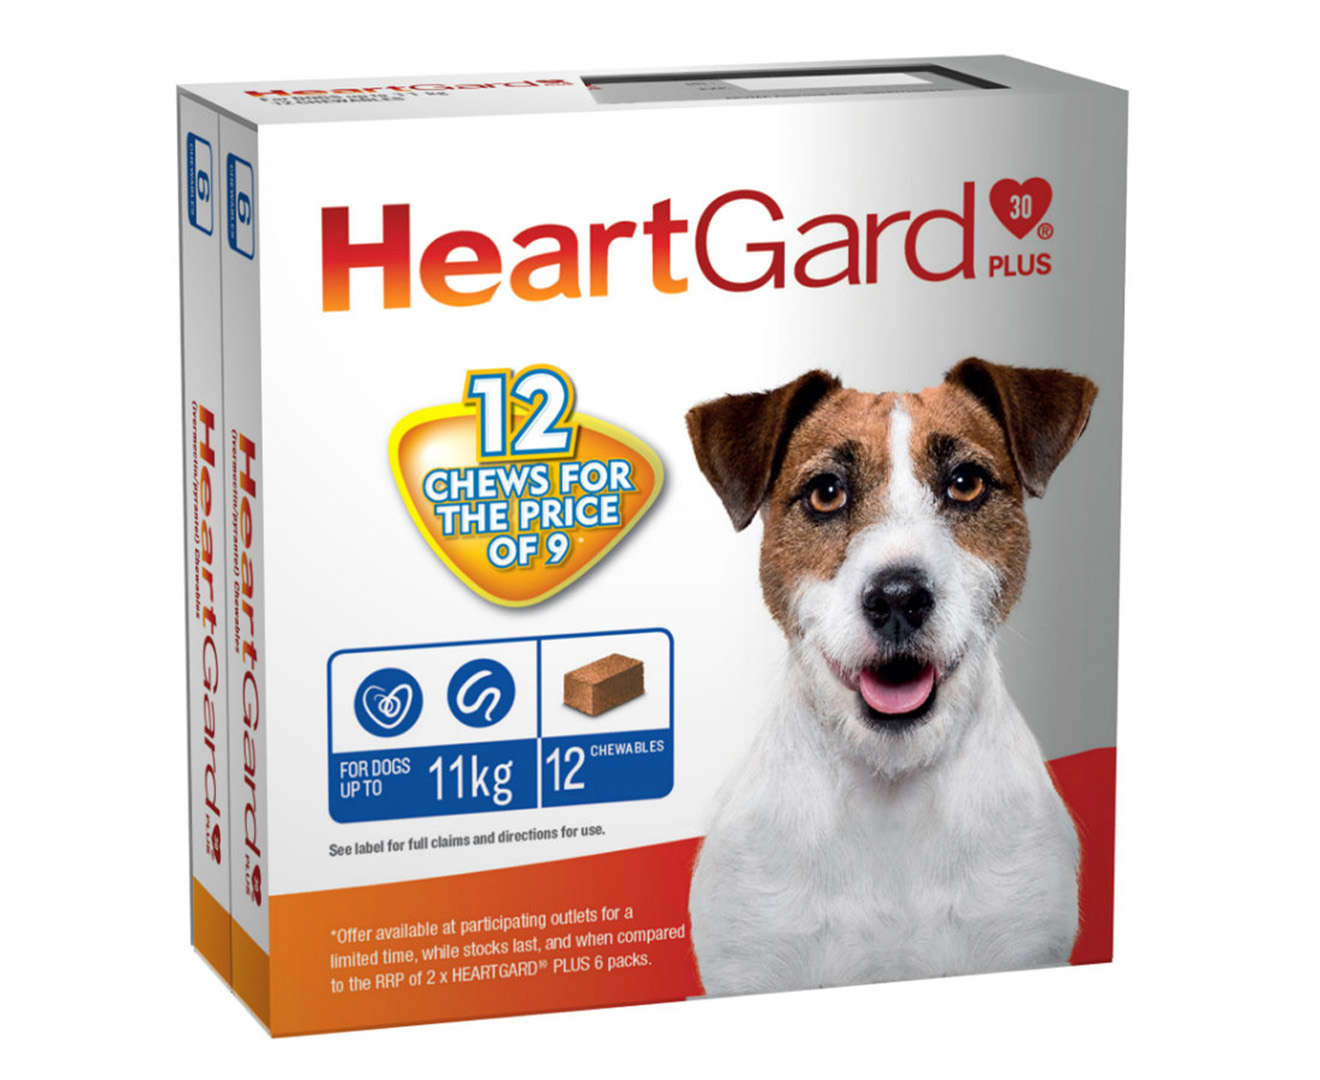 heartgard-plus-worm-protection-chews-for-small-dogs-up-to-11kg-12pk-catch-au